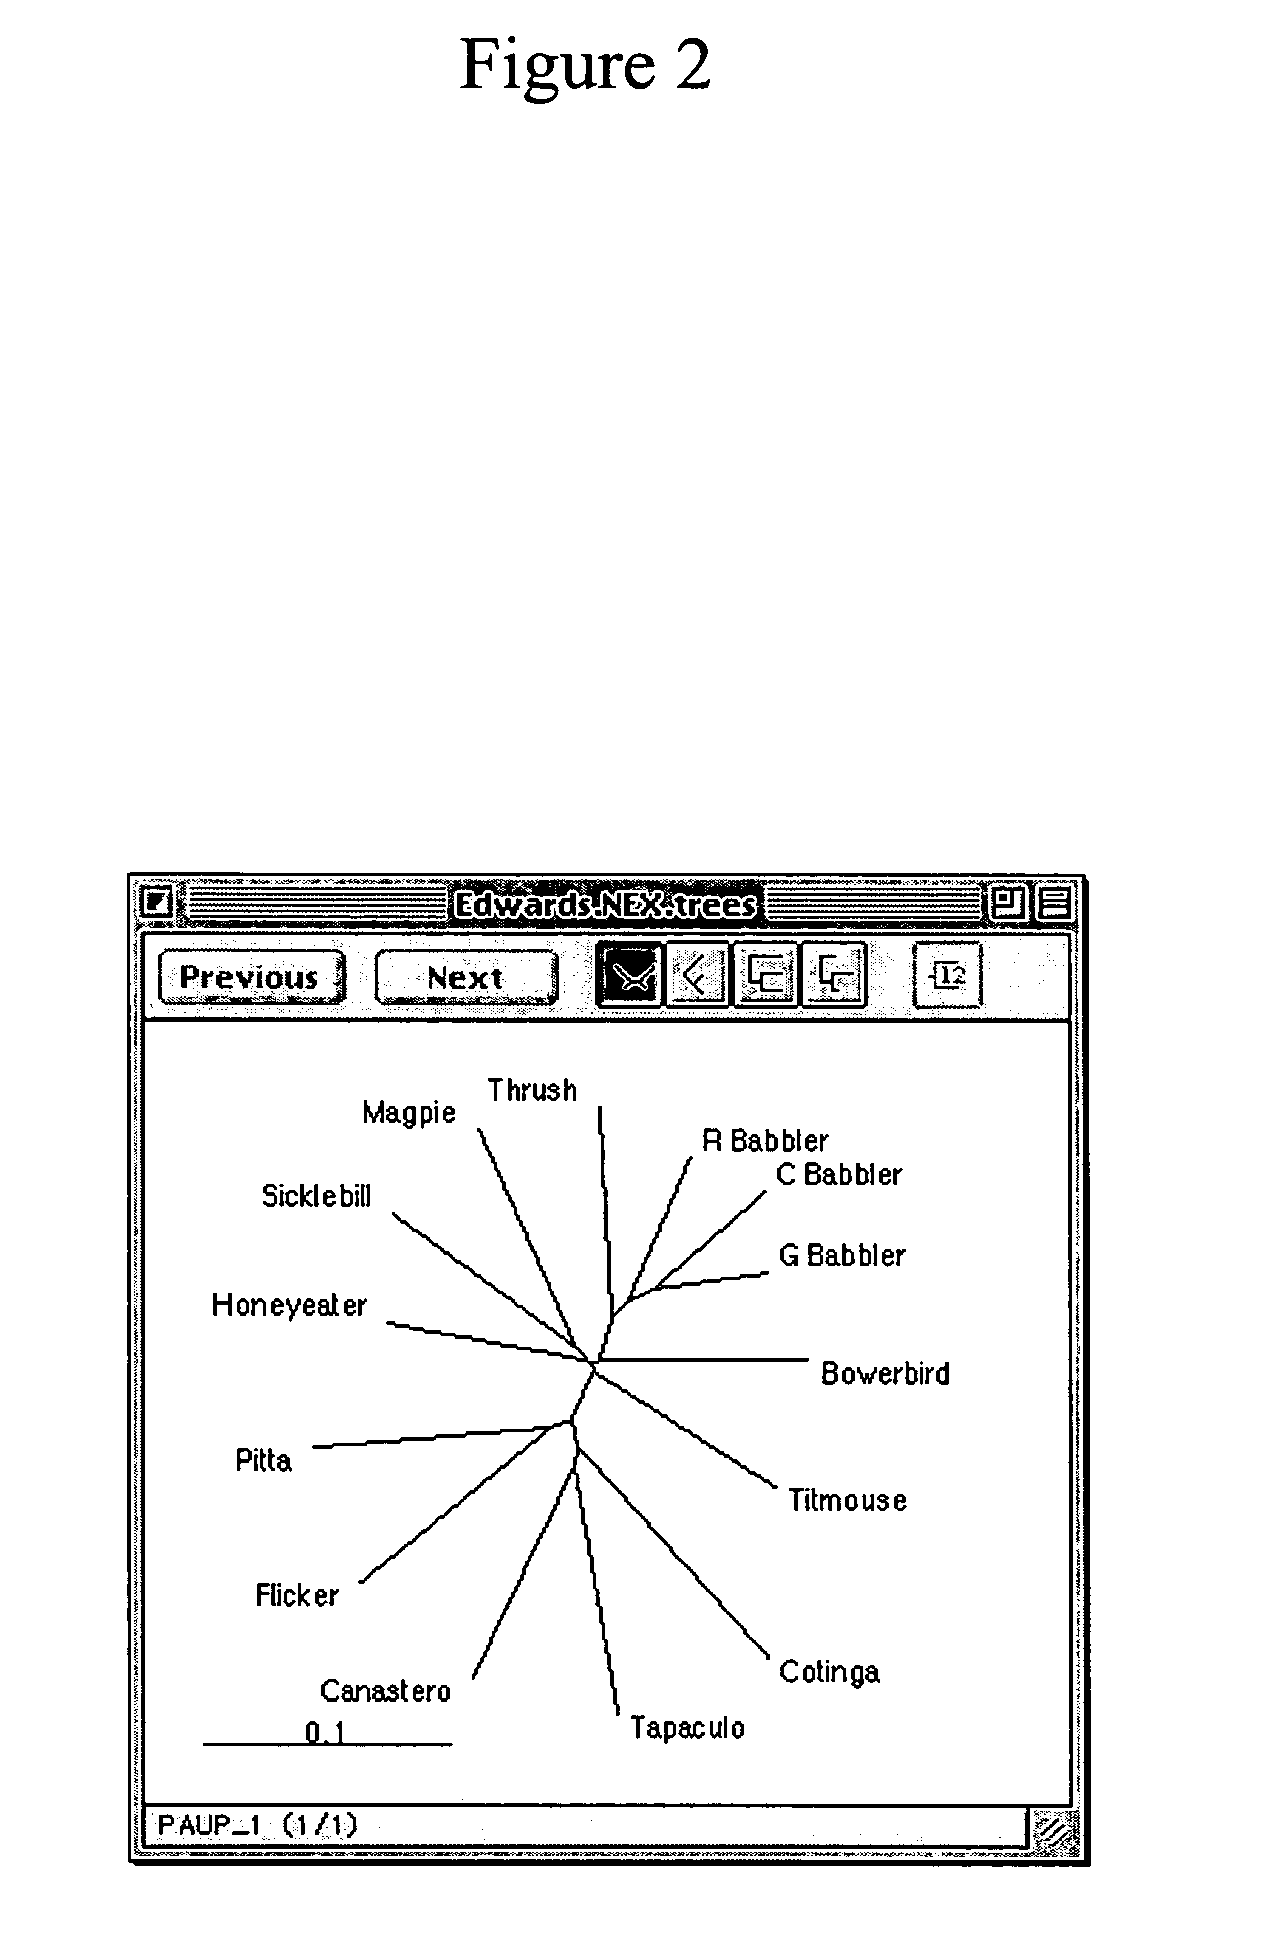 Methods and systems for technology analysis and mapping